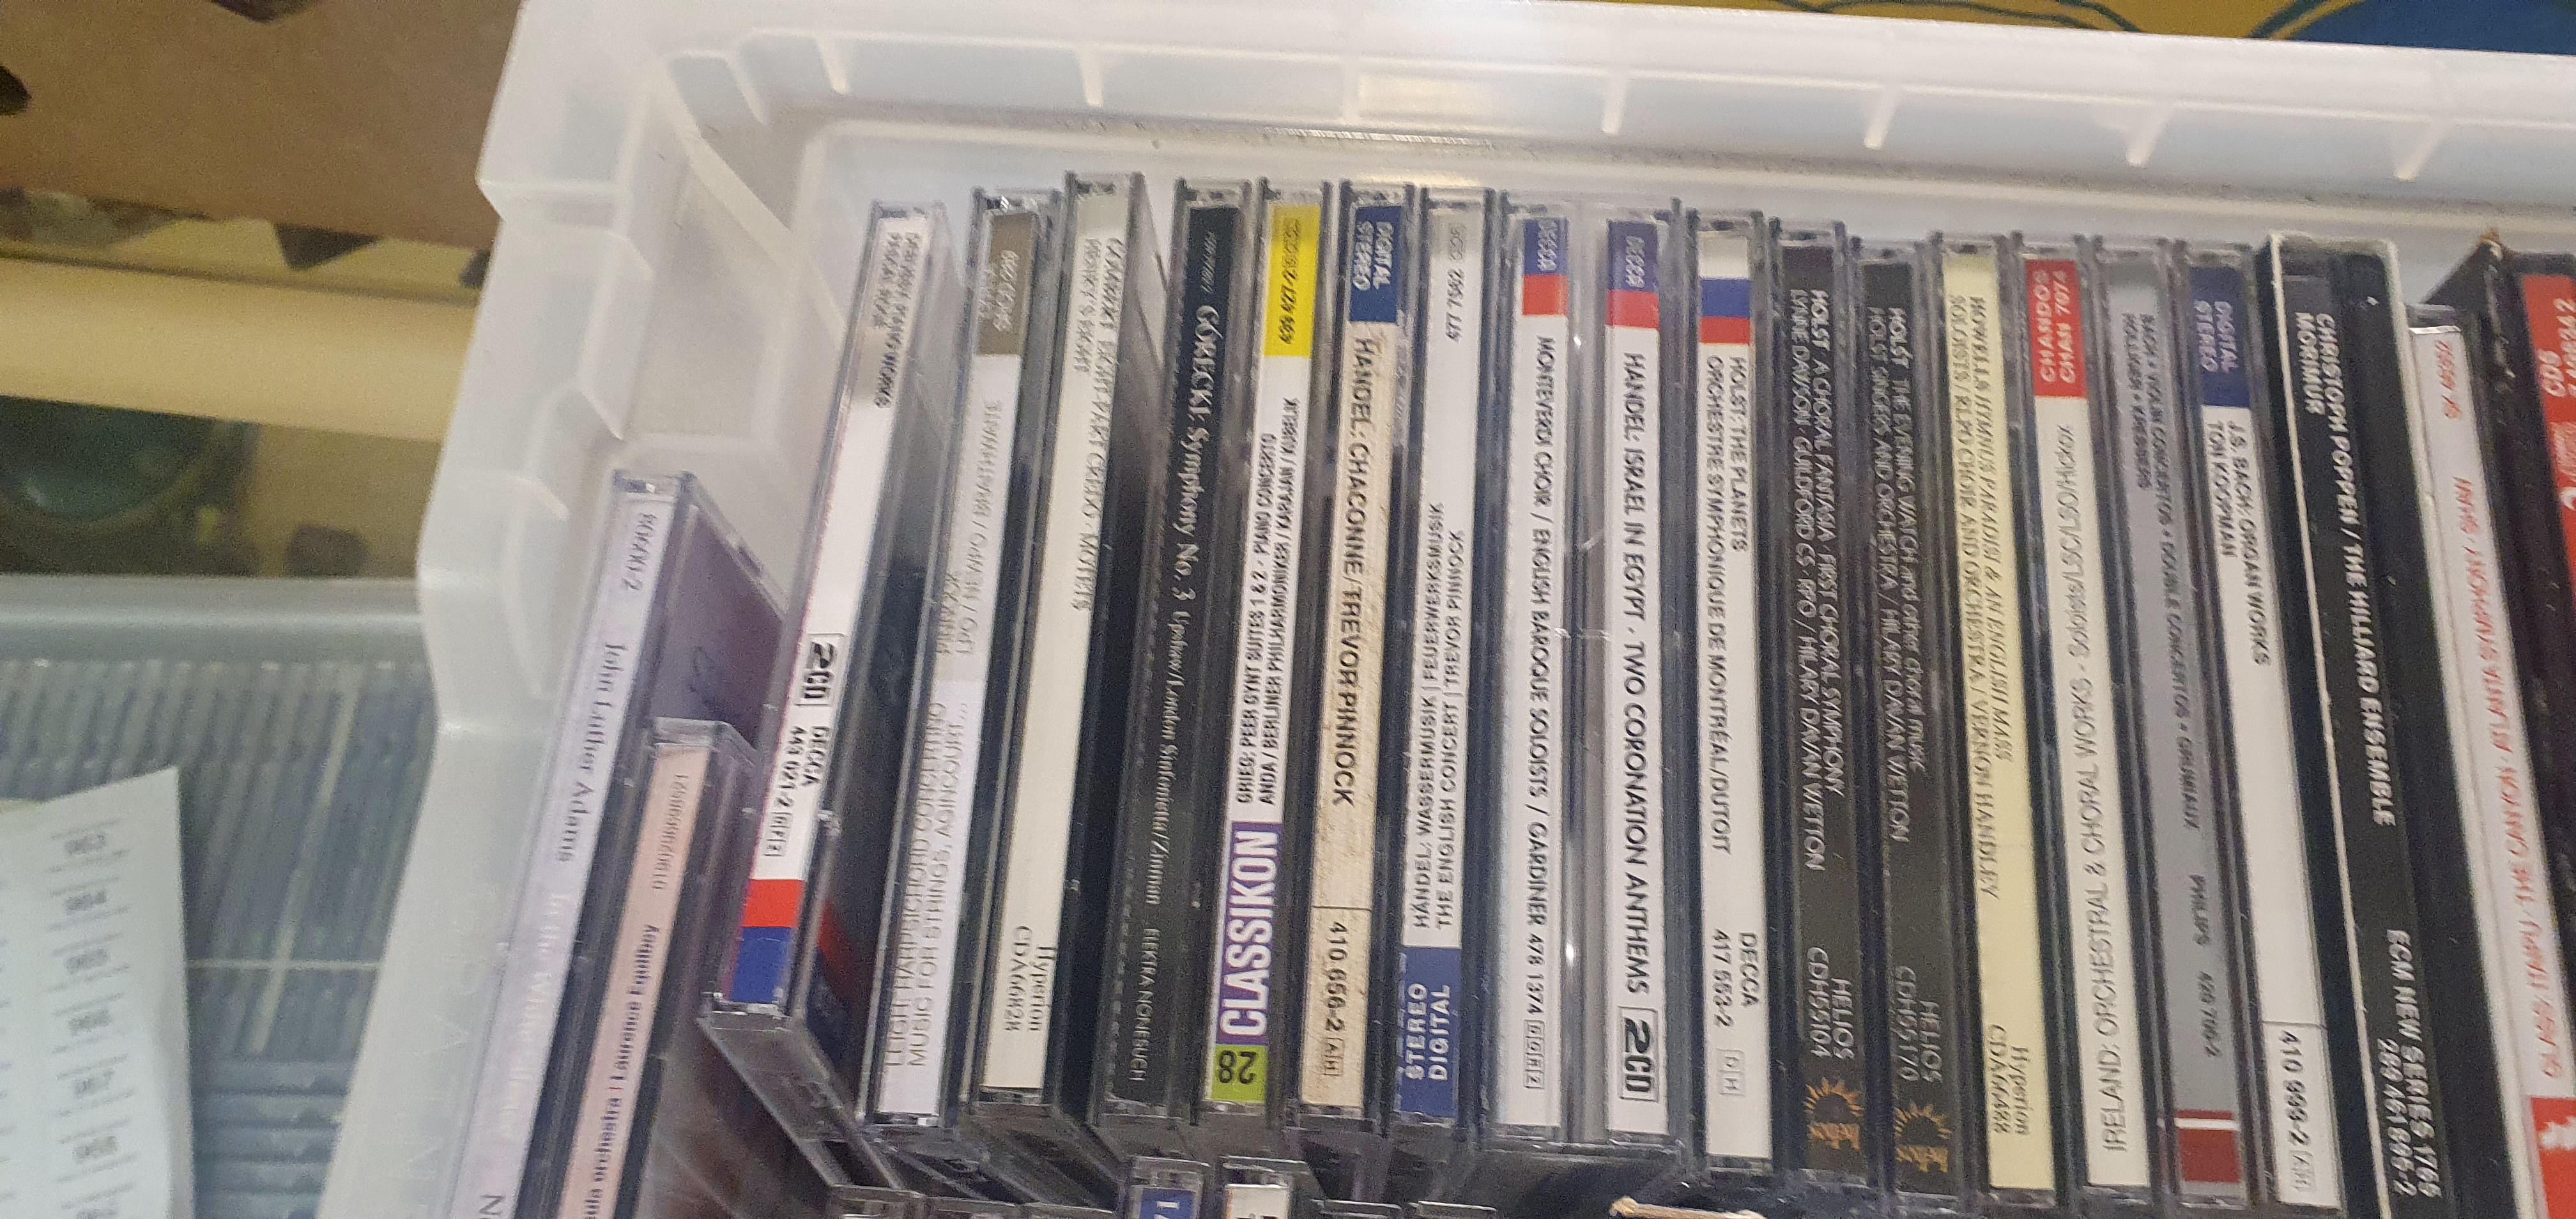 LARGE COLLECTION OF APPROXIMATELY 100 MUSIC CD'S - Image 2 of 4